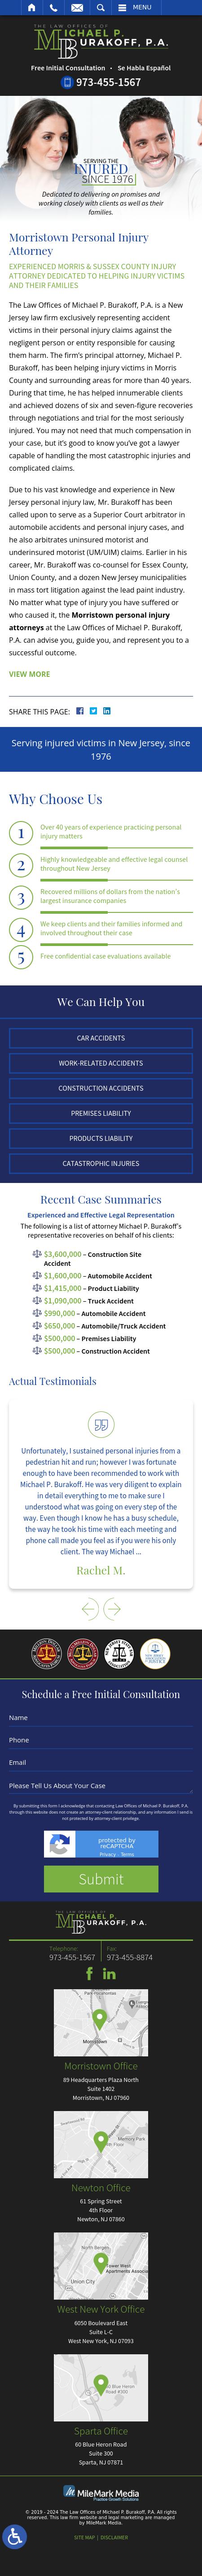 Law Offices of Michael P. Burakoff, P.A. - Morristown NJ Lawyers